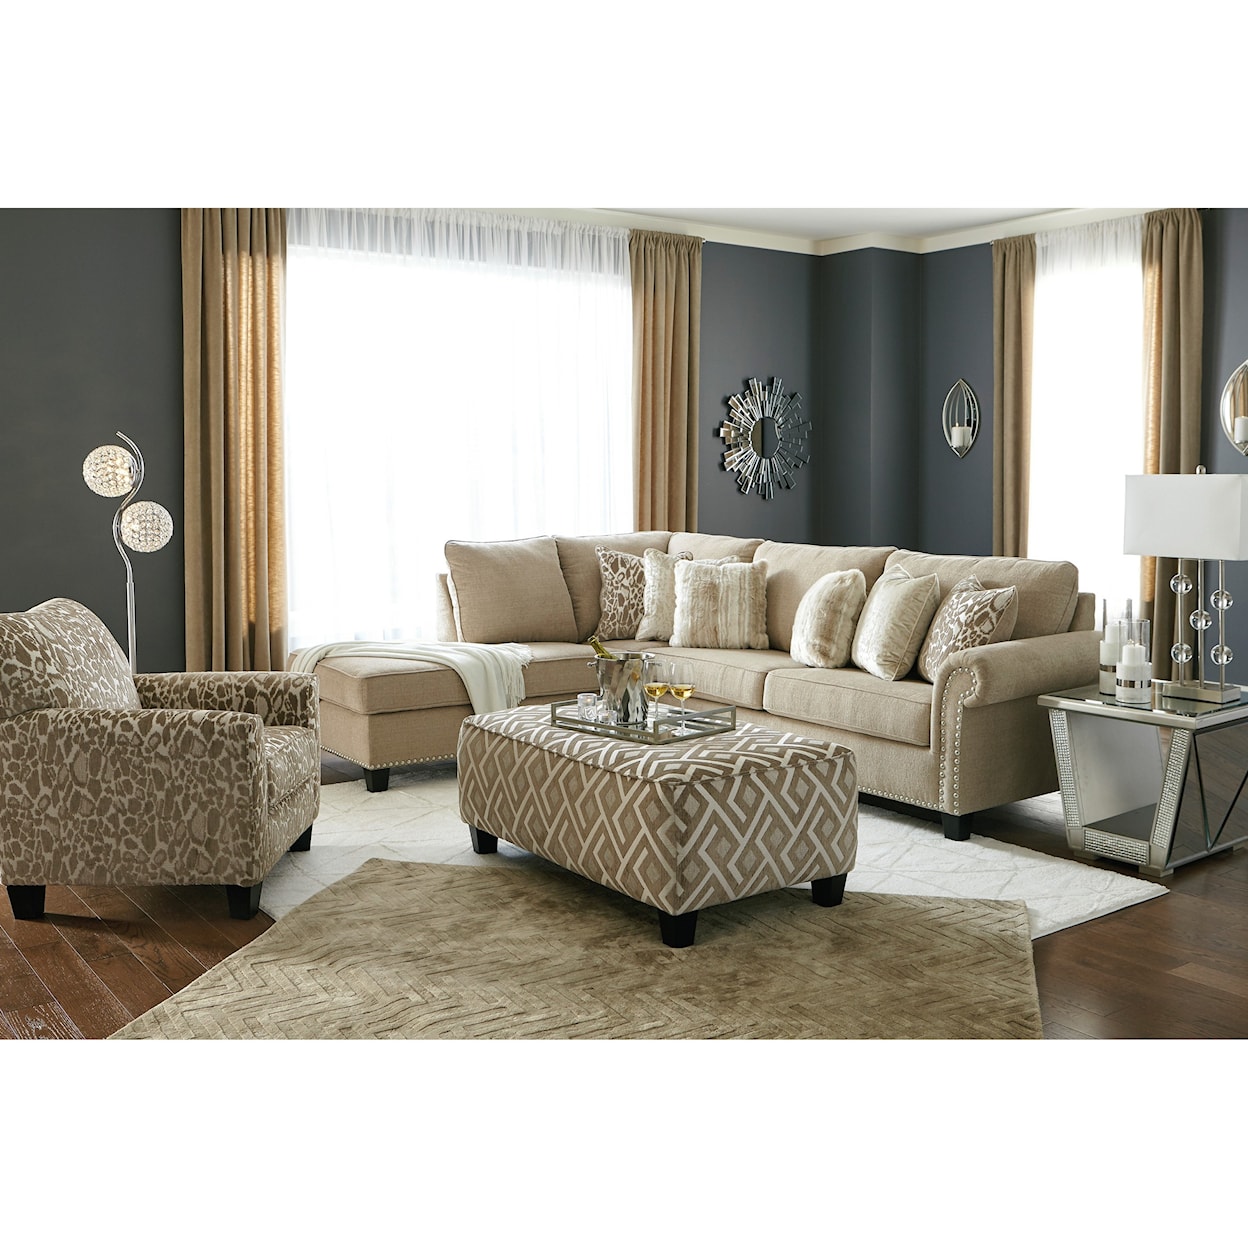 Signature Design by Ashley Dovemont 4pc Living Room Group